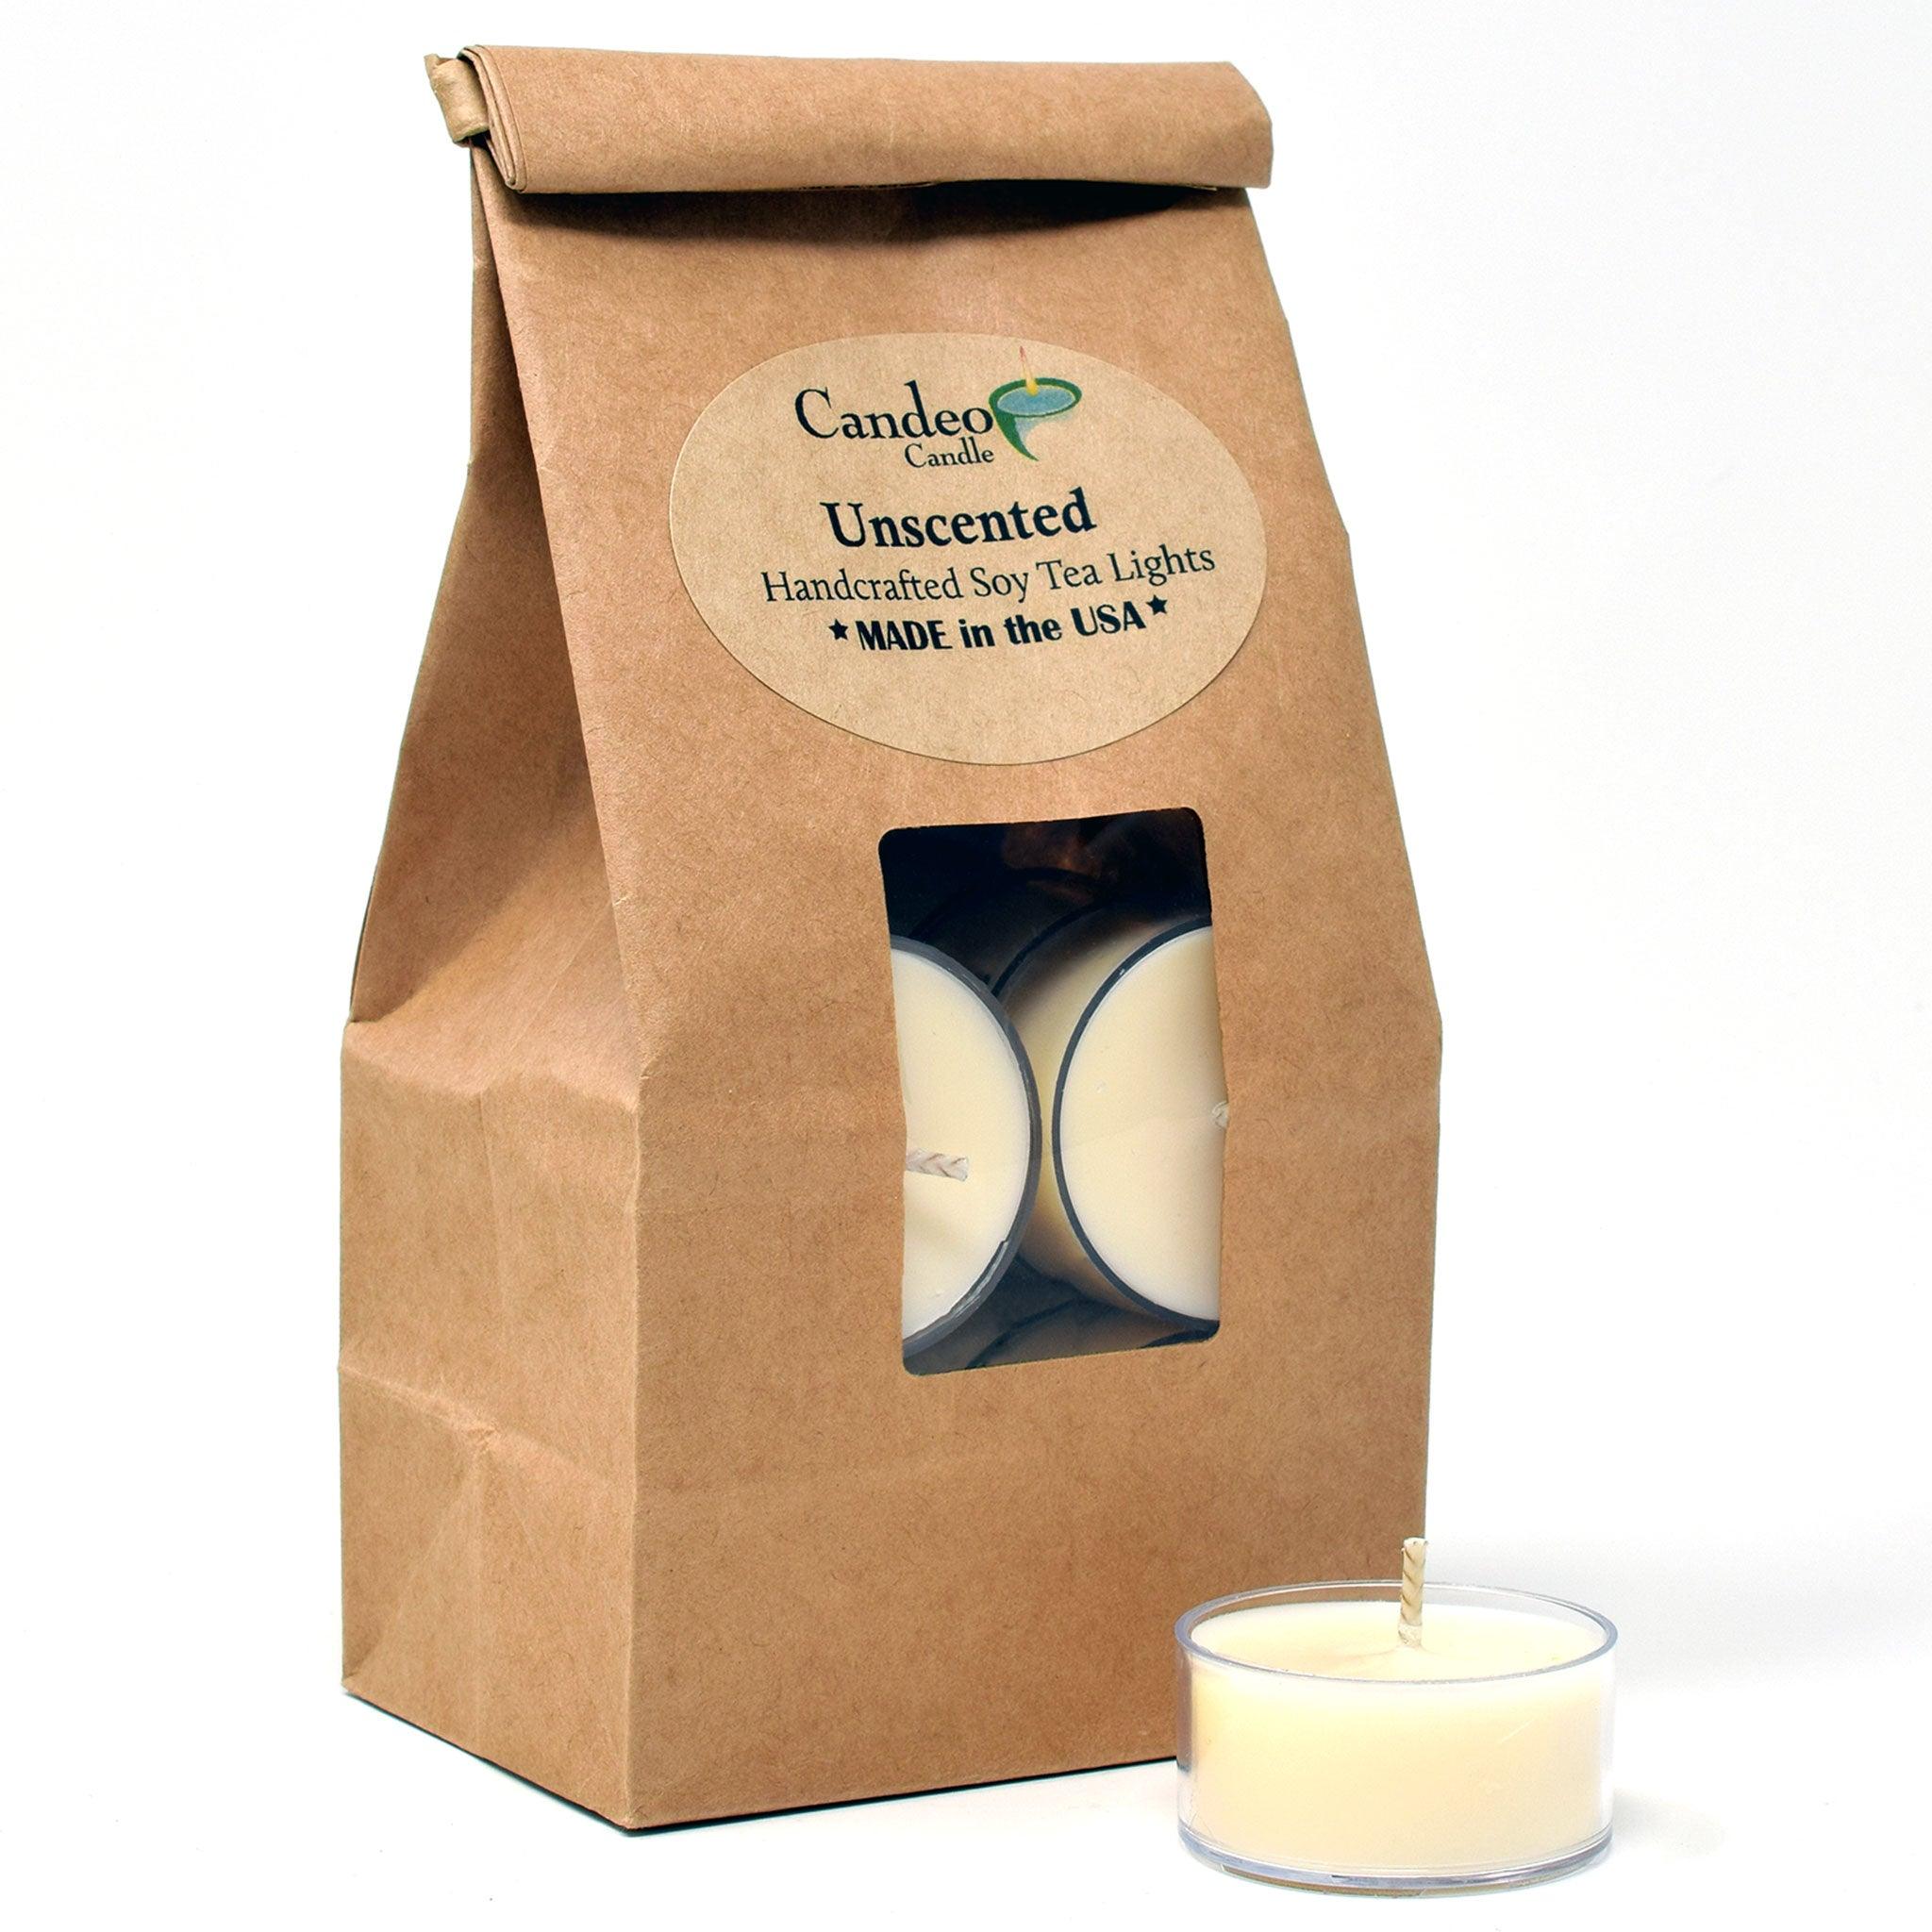 Unscented Soy Tea Light Candles - Candeo Candle